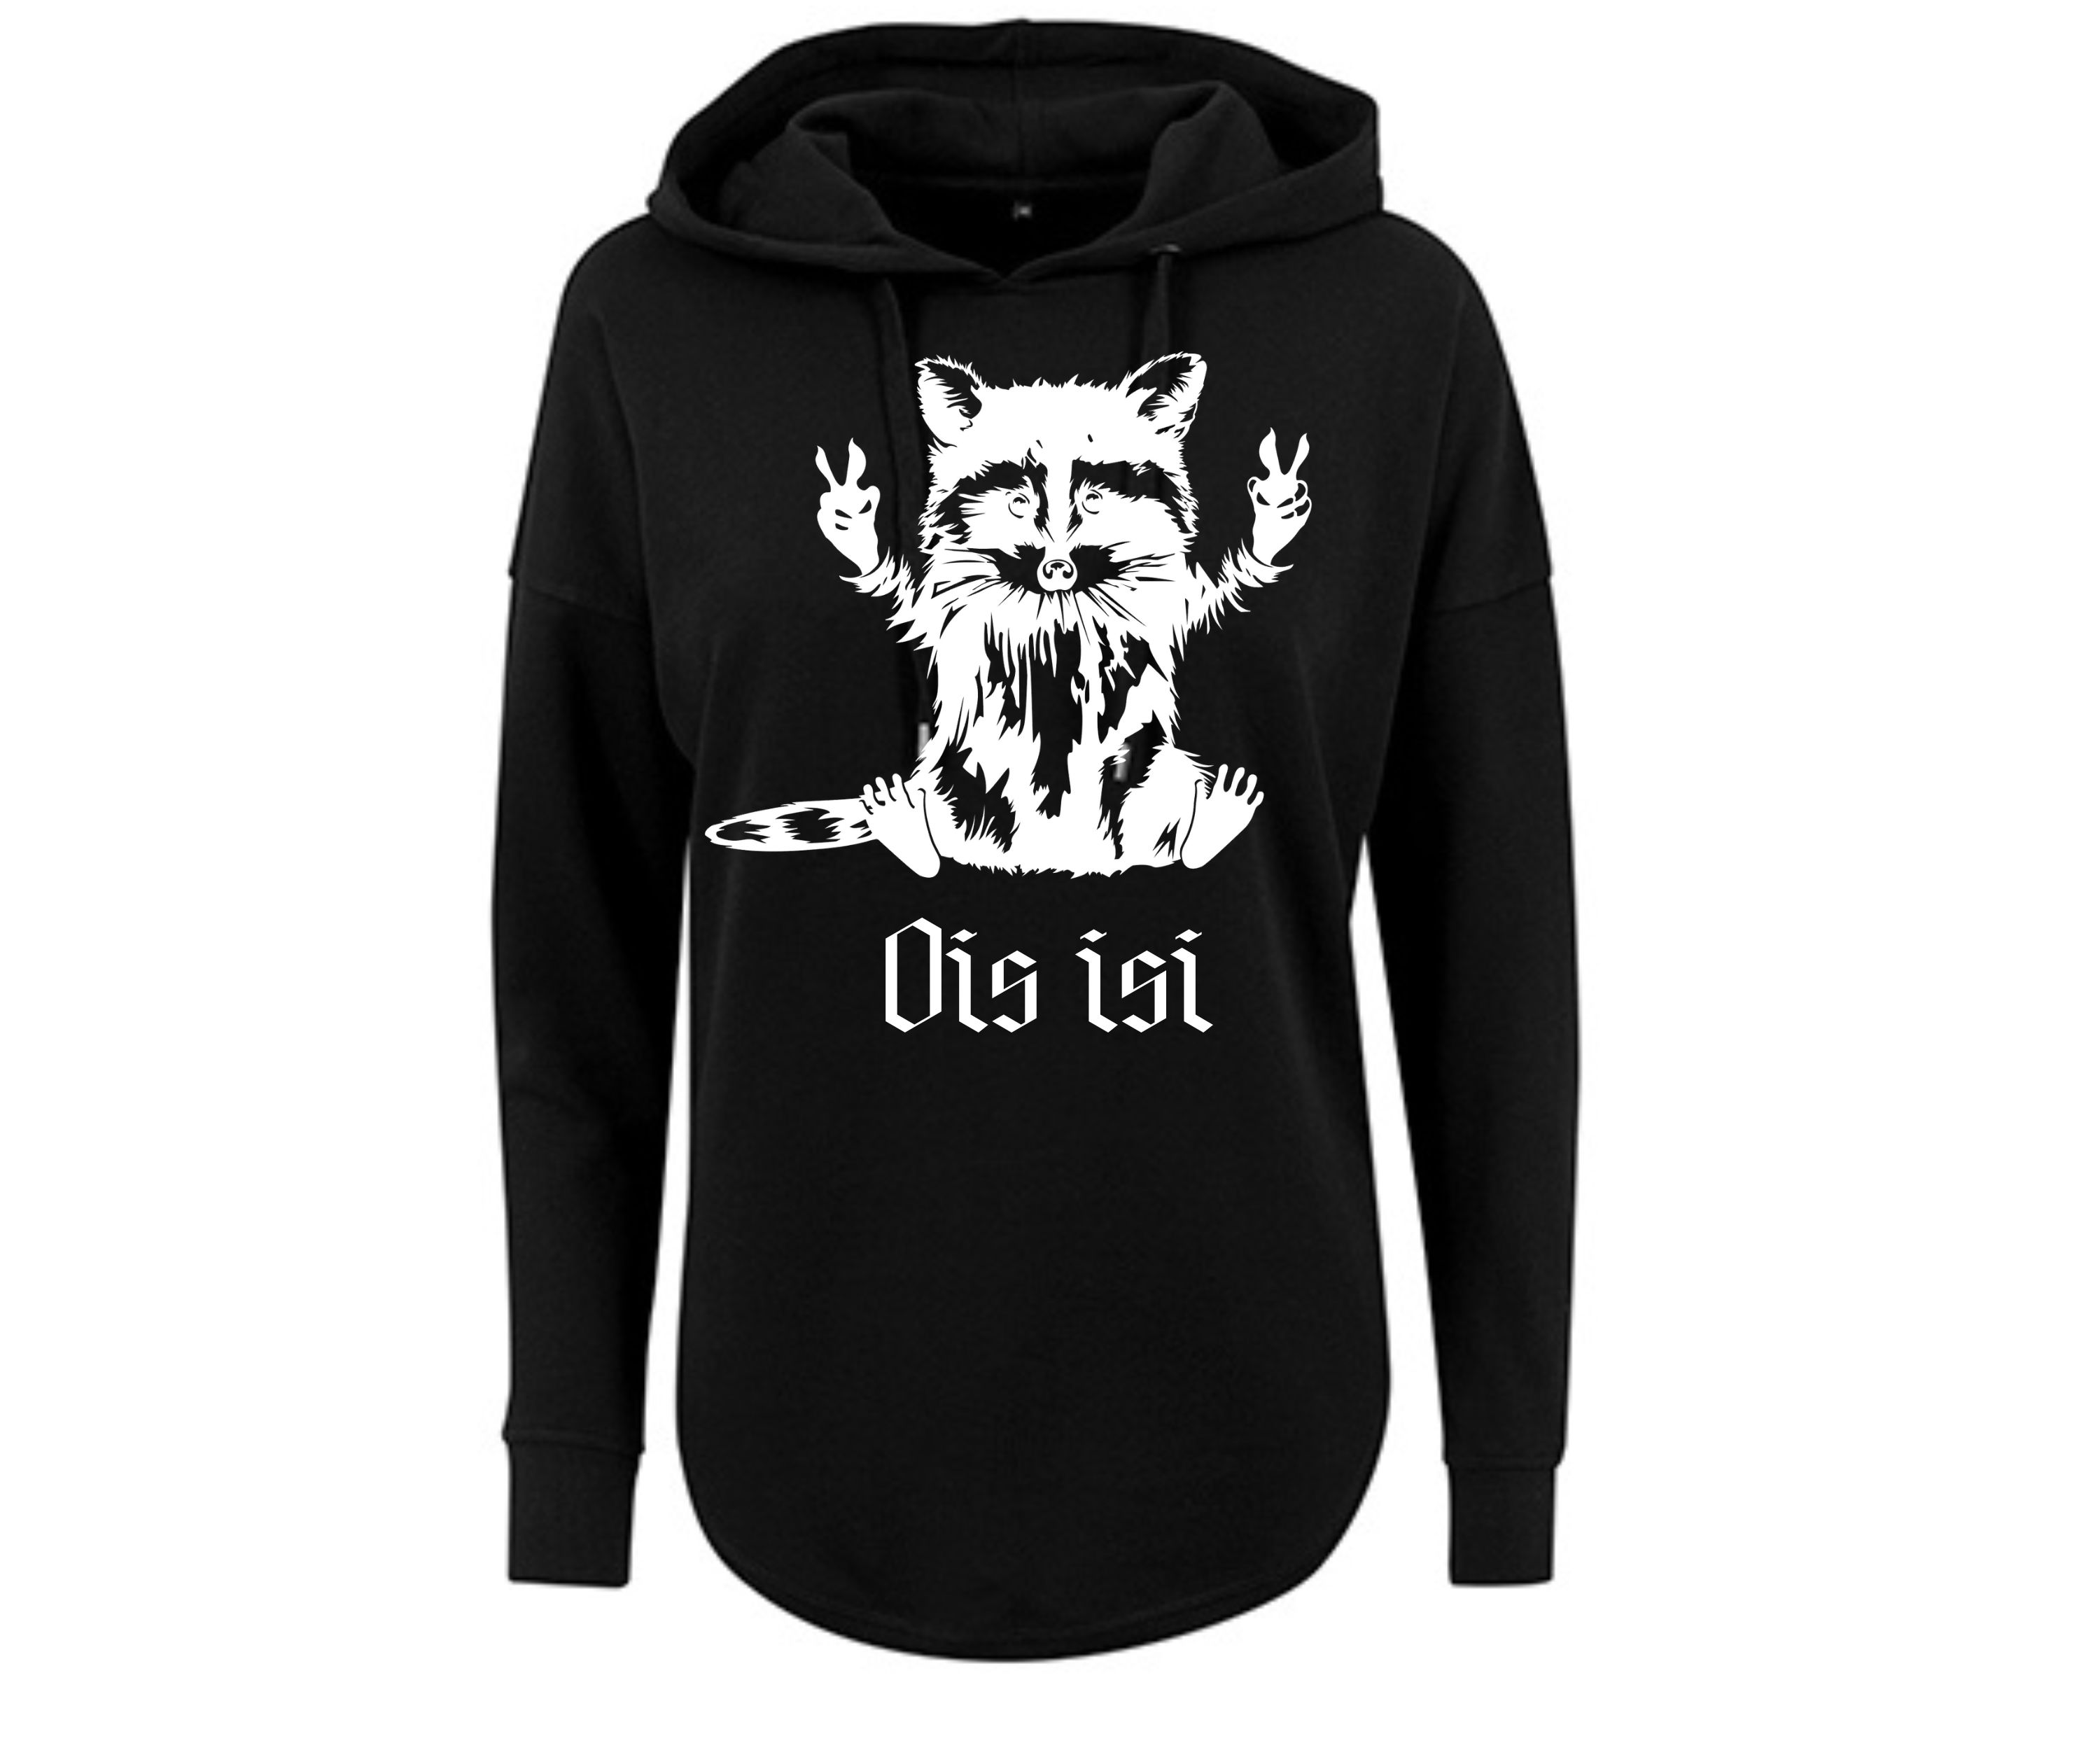 Hoodie Waschbär Fred Ois isi Oversized Black L